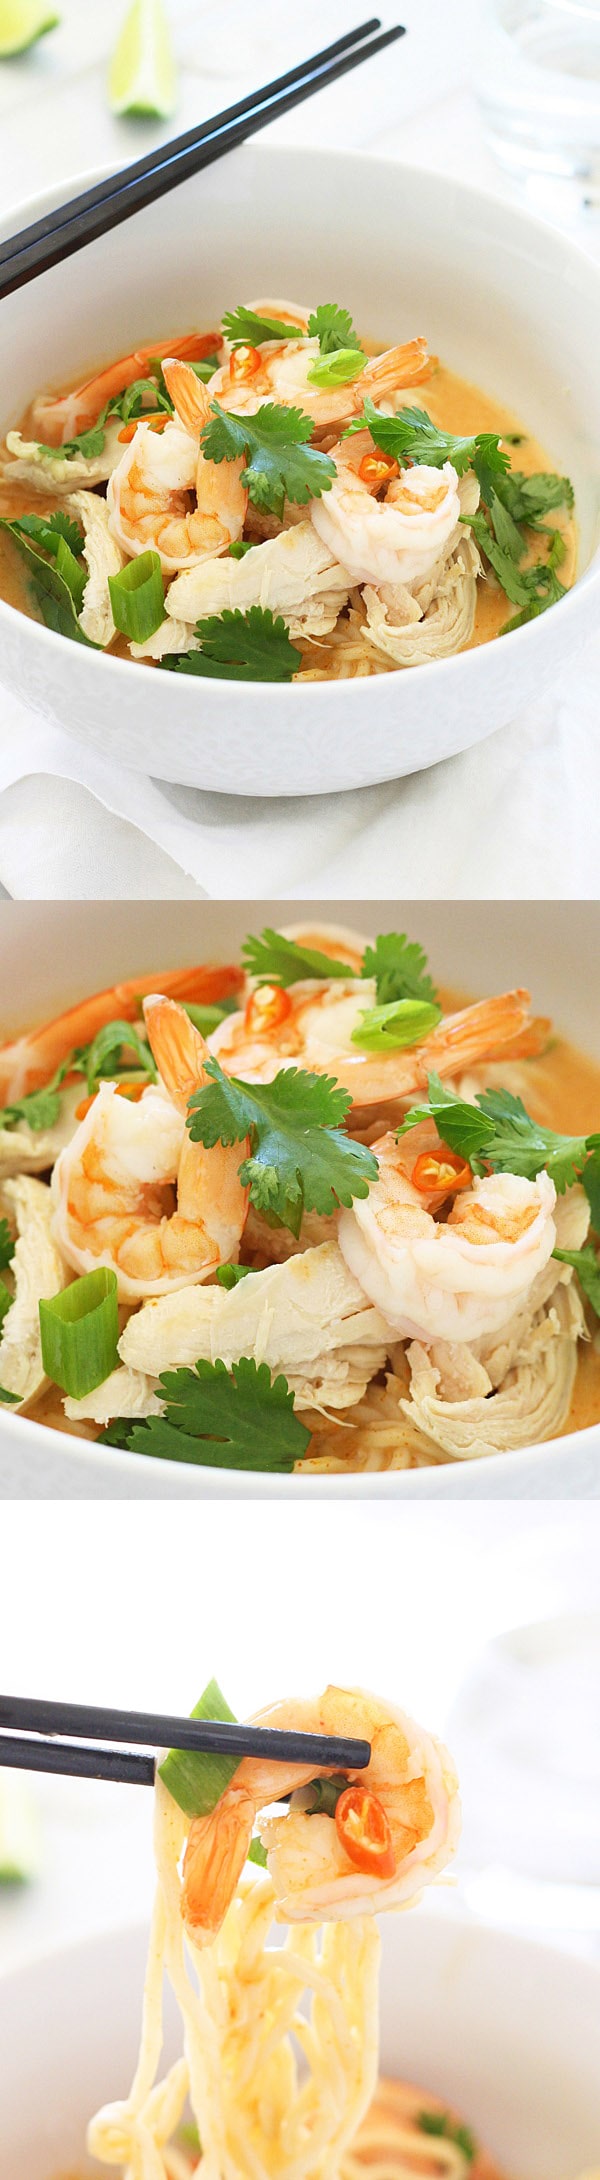 Coconut Curry Noodle Bowl – incredibly delicious, light, and refreshing Coconut Curry Noodle Bowl topped with chicken, shrimp, & herbs. | rasamalaysia.com